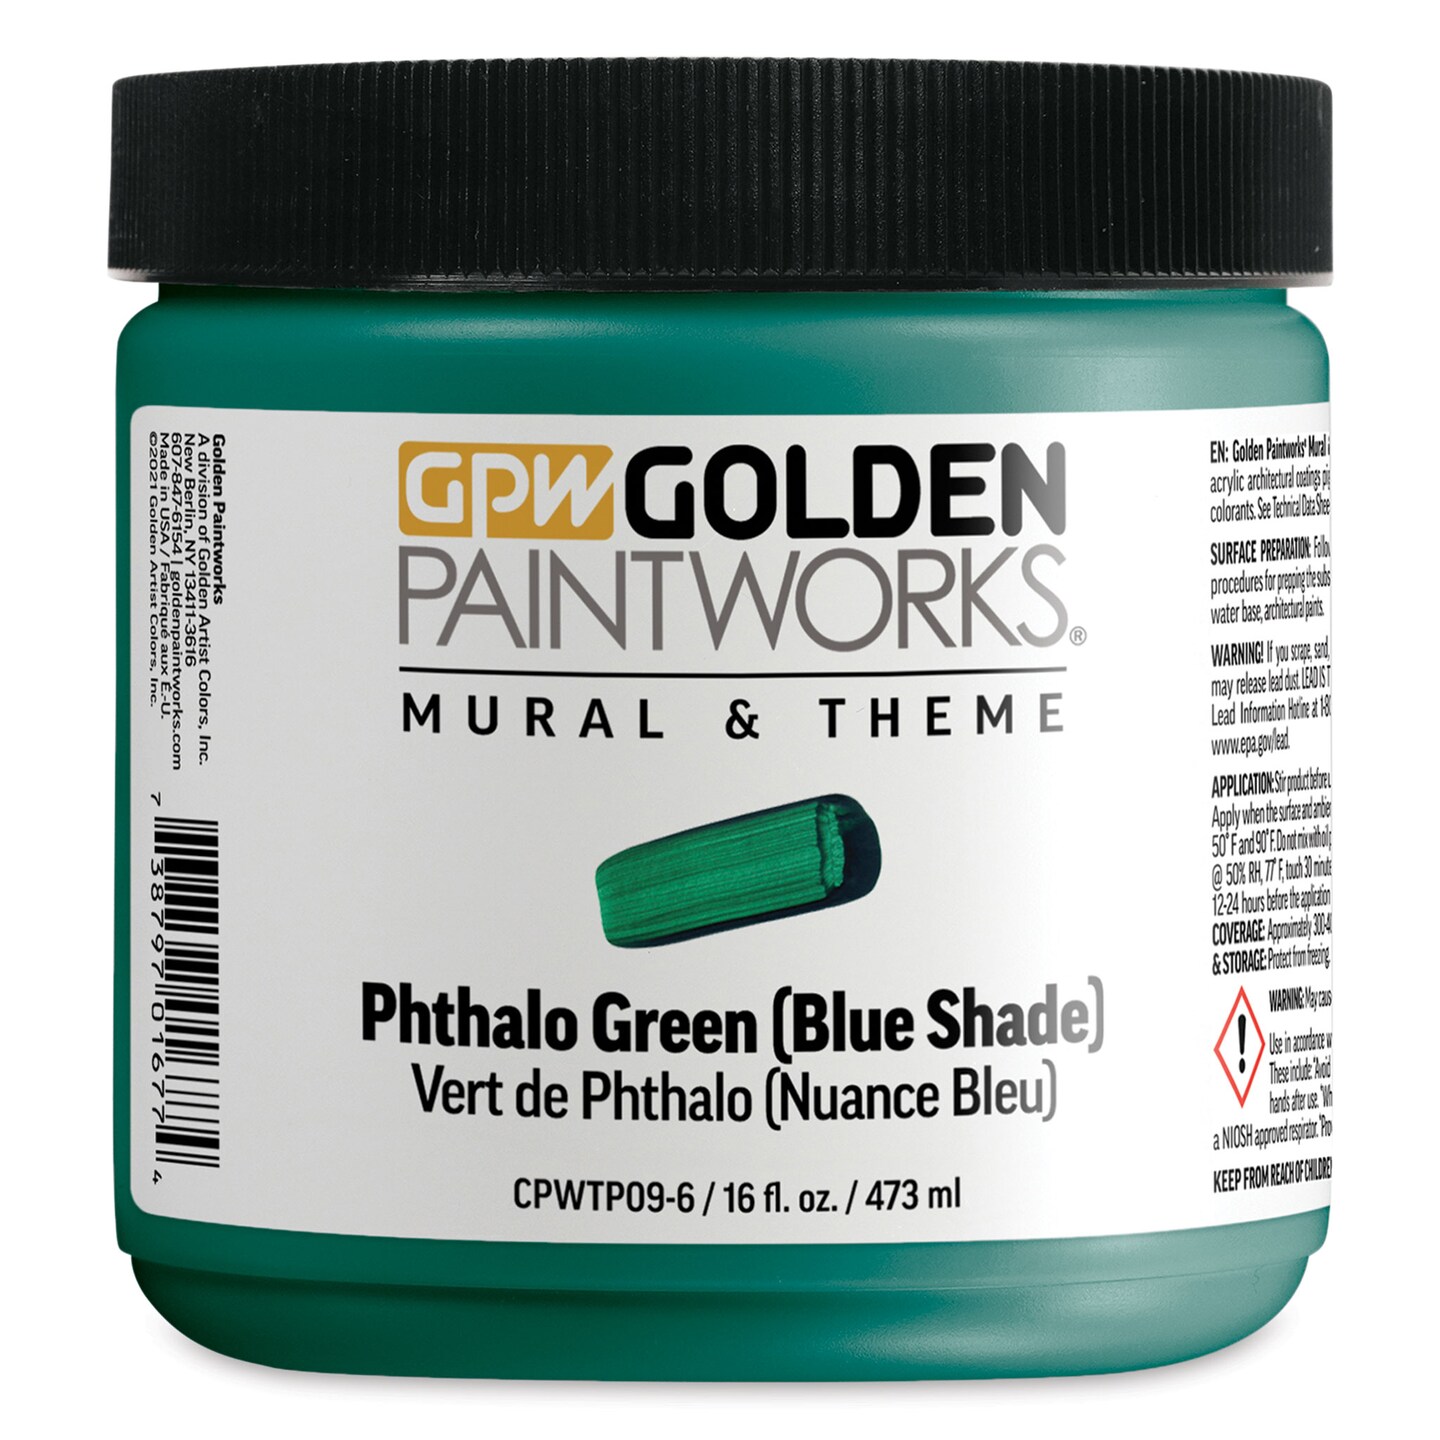 Golden Paintworks Mural and Theme Acrylic Paint - Phthalo Green (Blue Shade), 16 oz, Jar